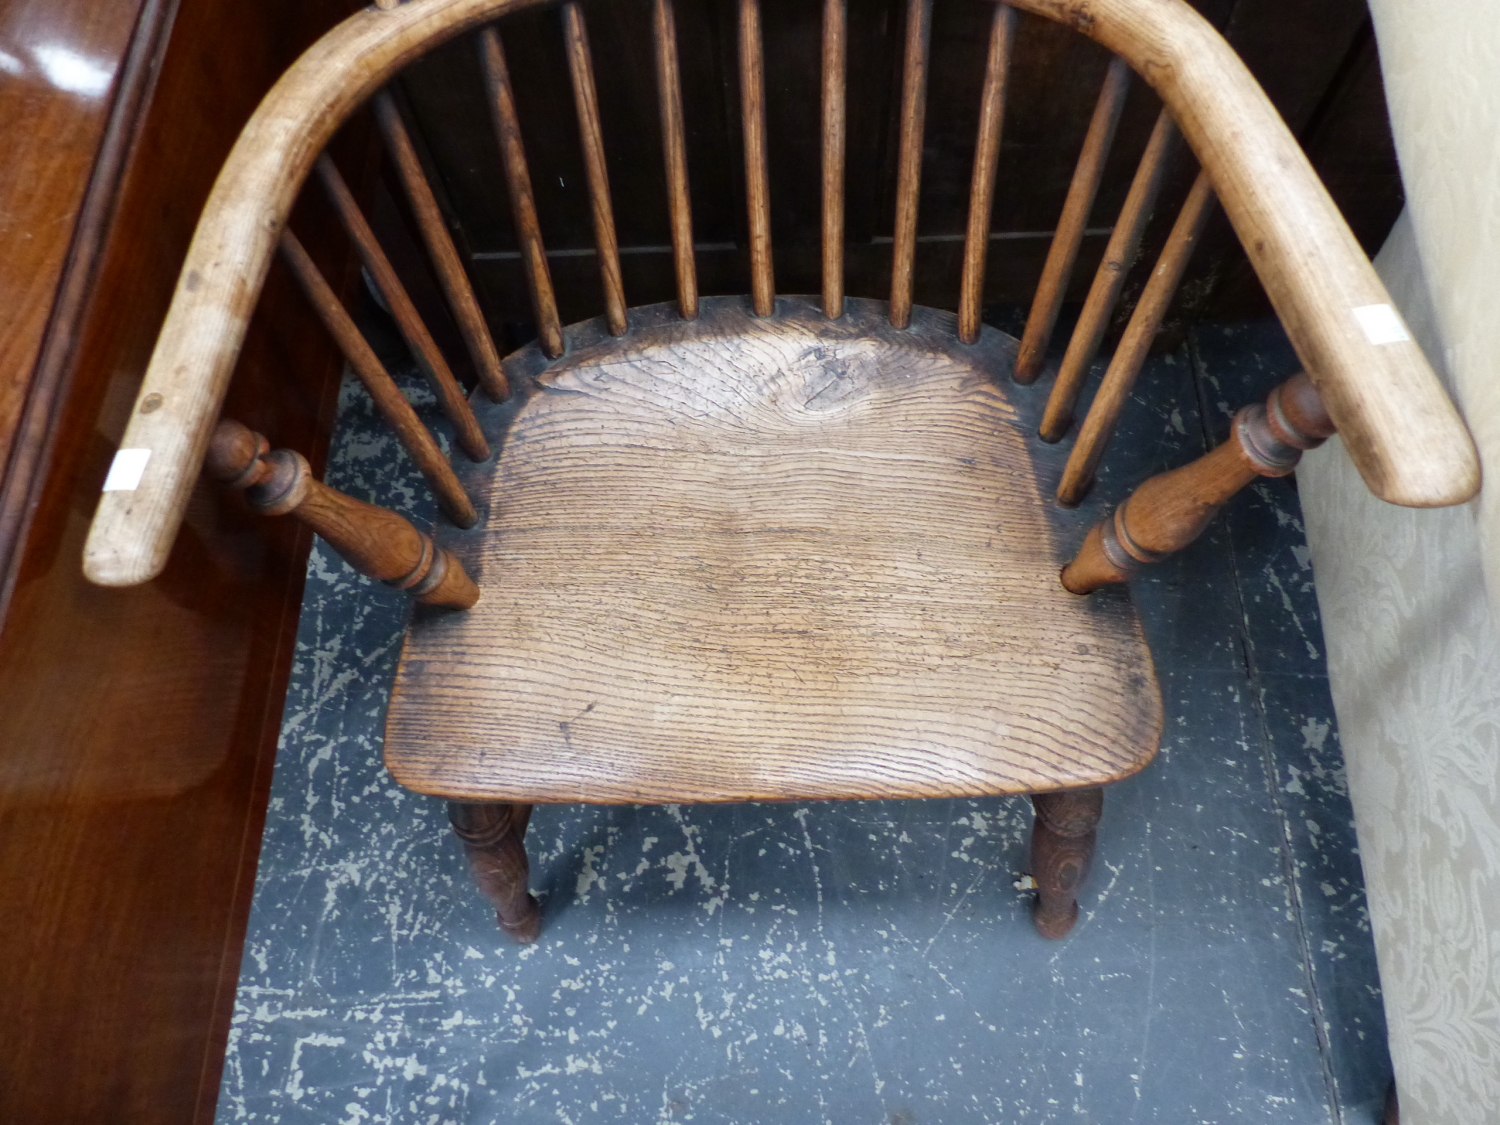 TWO OAK AND ELM WINDSOR CHAIRS WITH ROUND ARCH HOOPS SUPPORTING THE STICK BACKS AND FORMING THE ARMS - Image 6 of 8